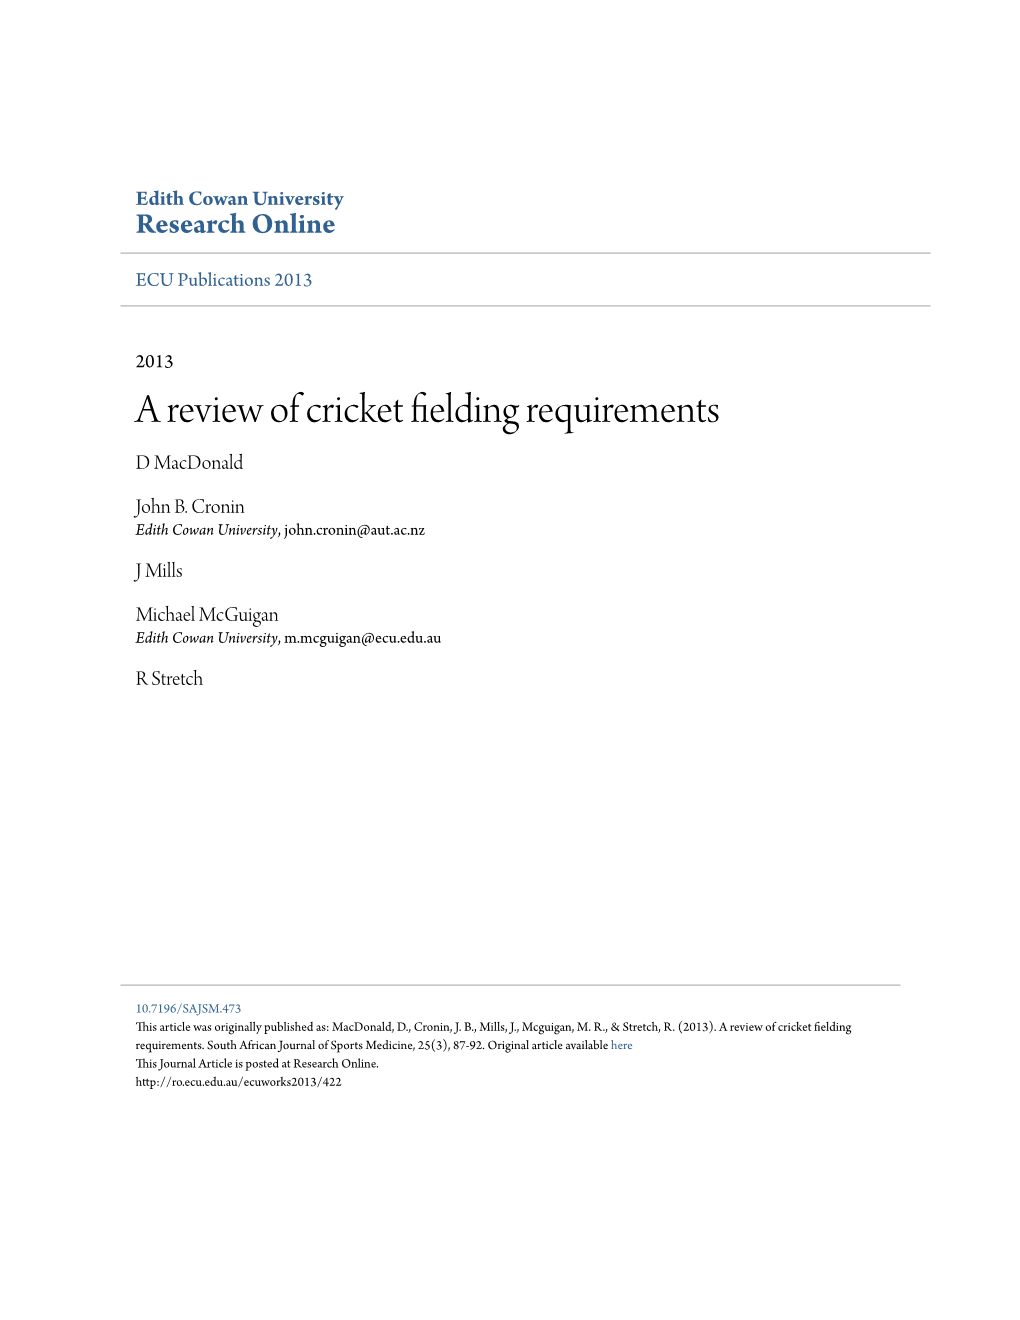 A Review of Cricket Fielding Requirements D Macdonald